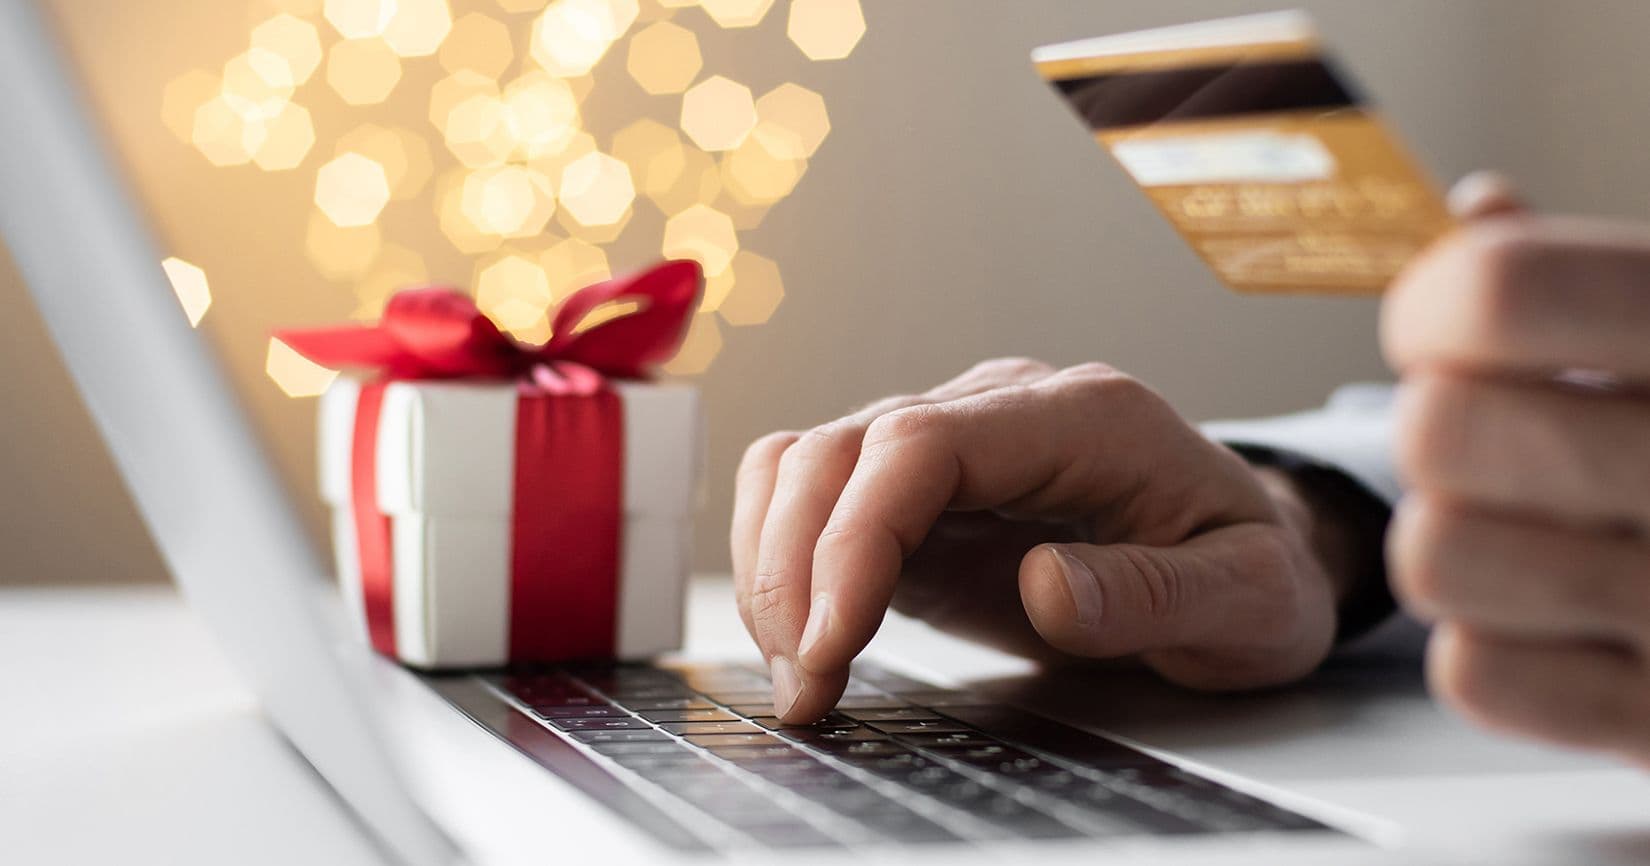 "The Risks of Relying on BNPL for Holiday Shopping post thumbnail"